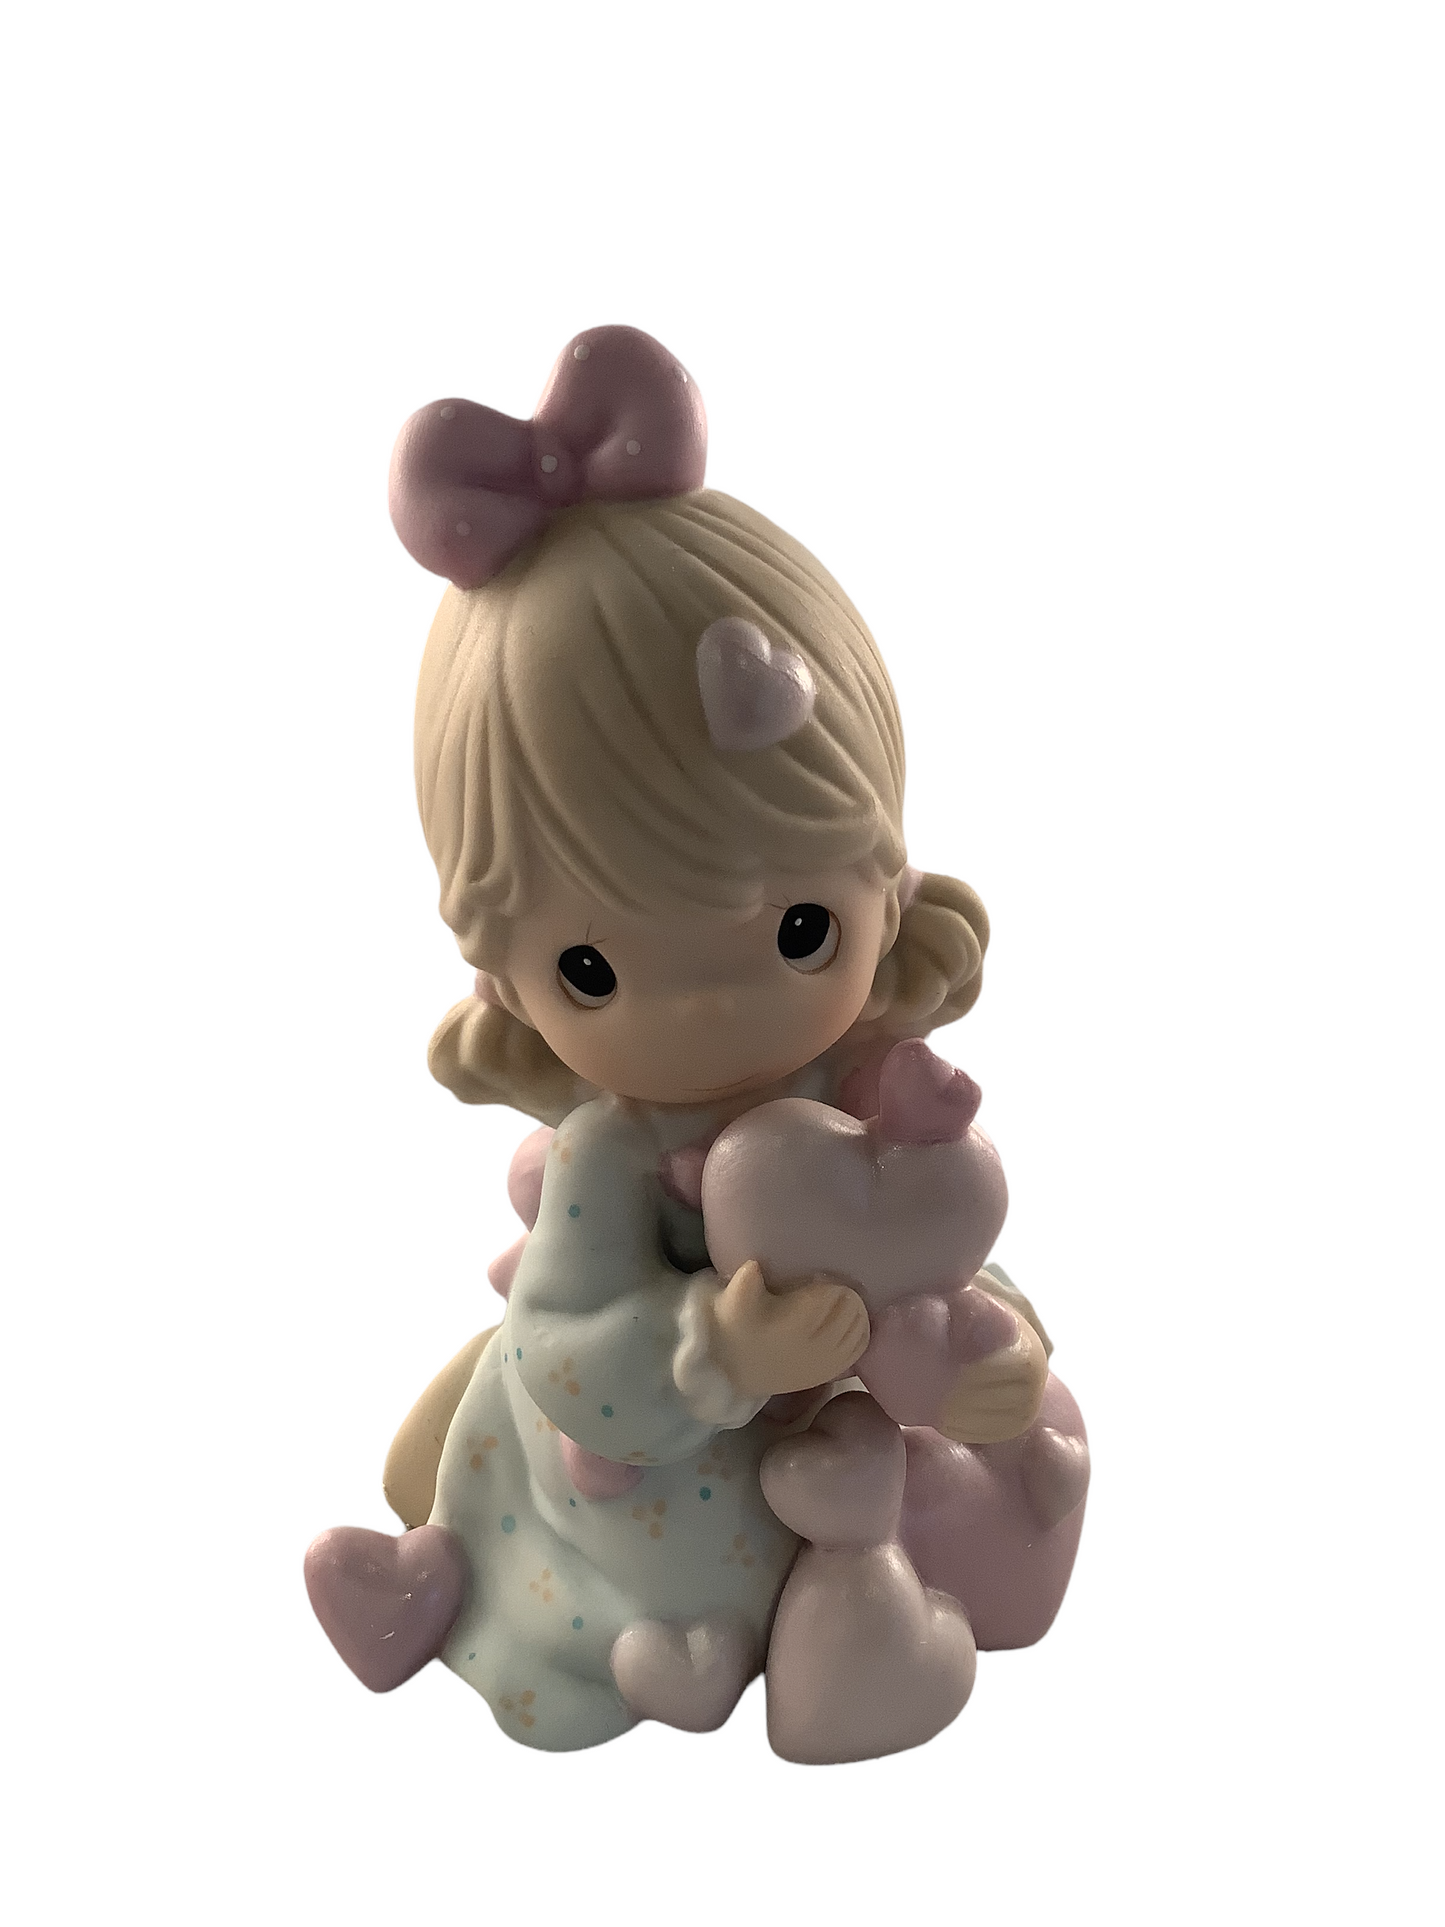 Overflowing With Love - Precious Moment Figurine